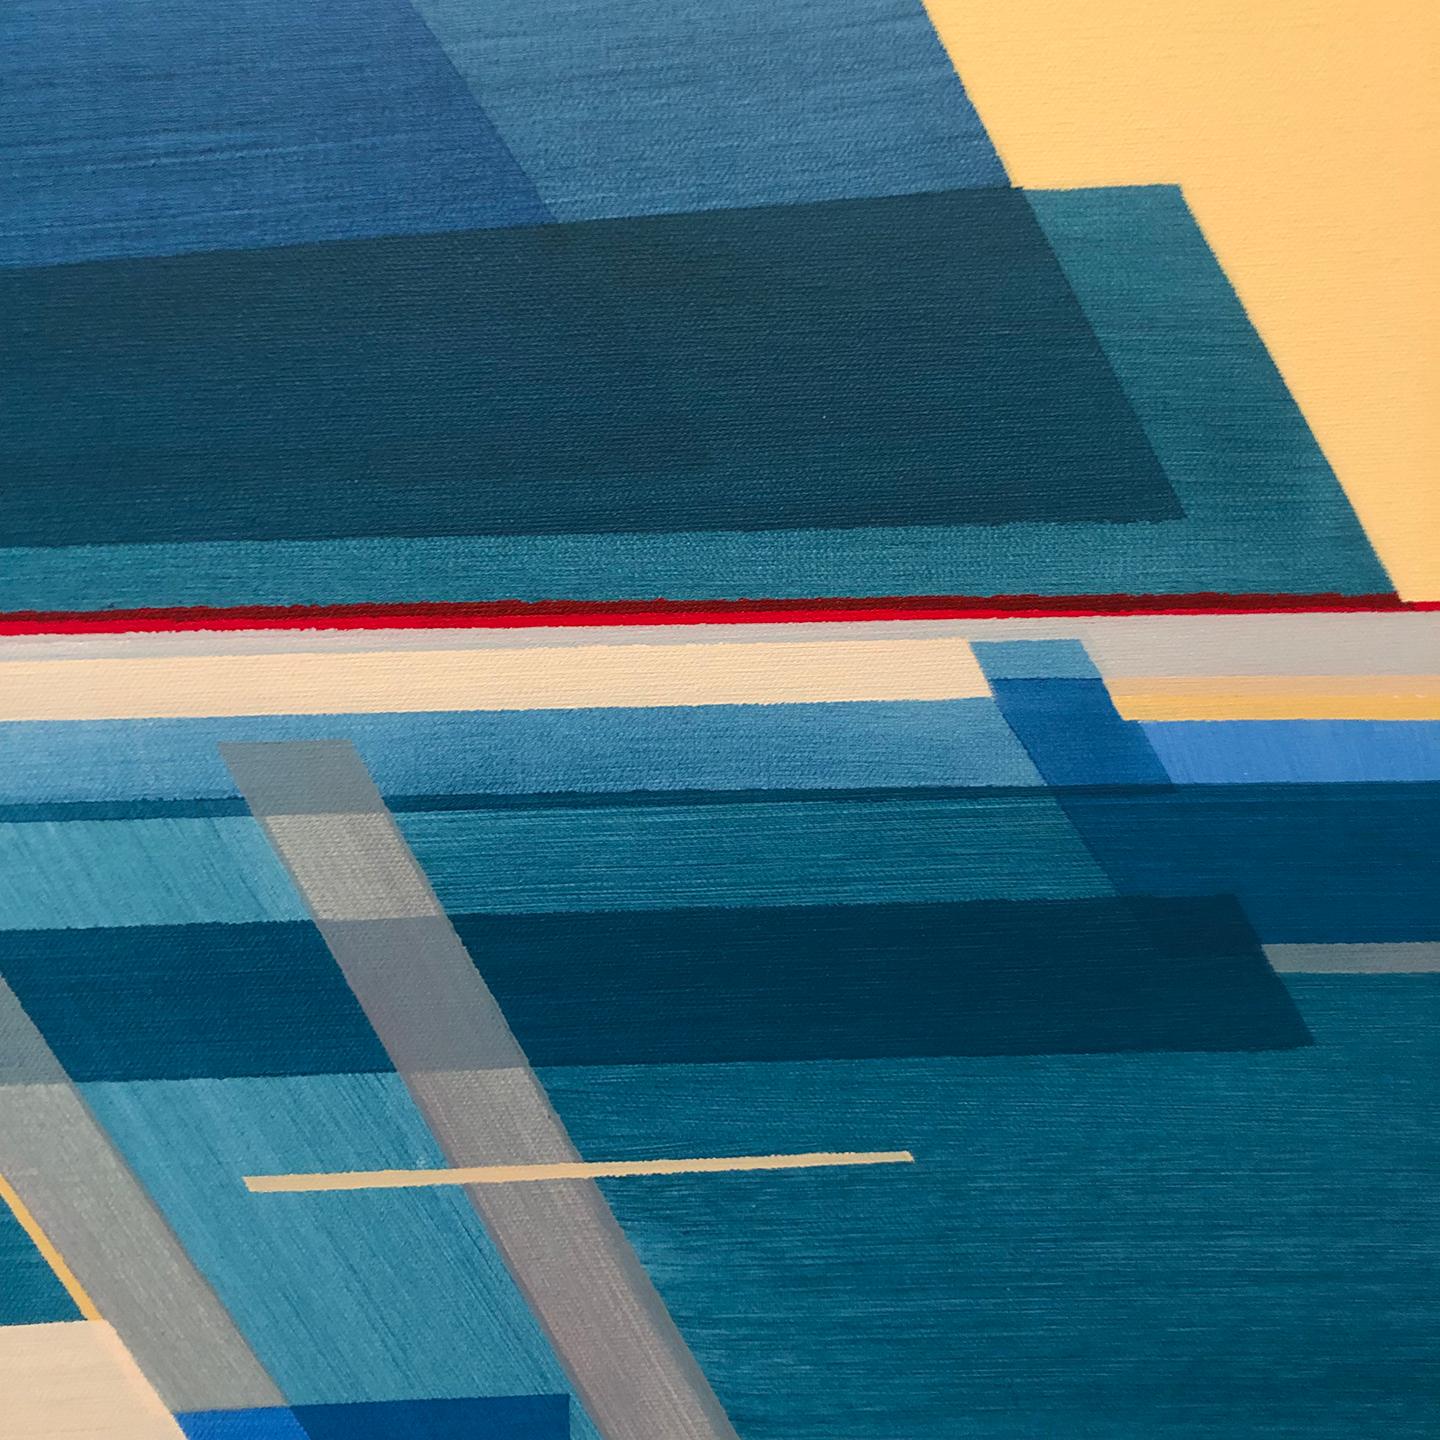 This abstract geometric painting by Shilo Ratner features geometric shapes in varying shades of blue, teal, and contrasting yellow-orange. The shapes are layered over top of one another horizontally, with most of the blue shades at the bottom and